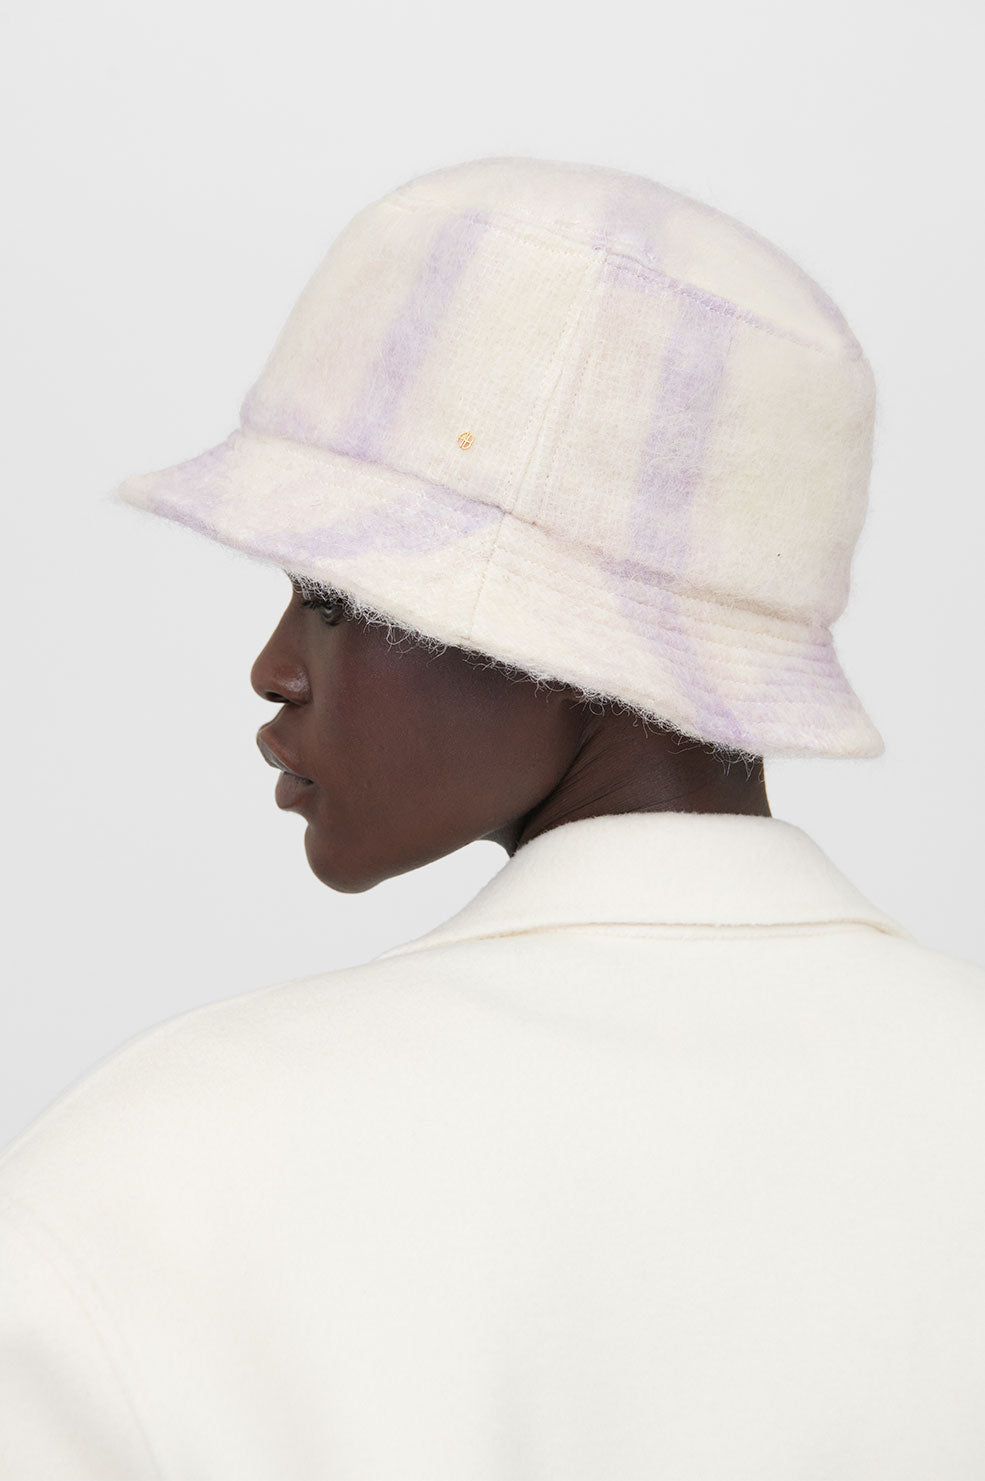 ANINE BING Cami Bucket Hat - Lavender And Cream Check - On Model Side View